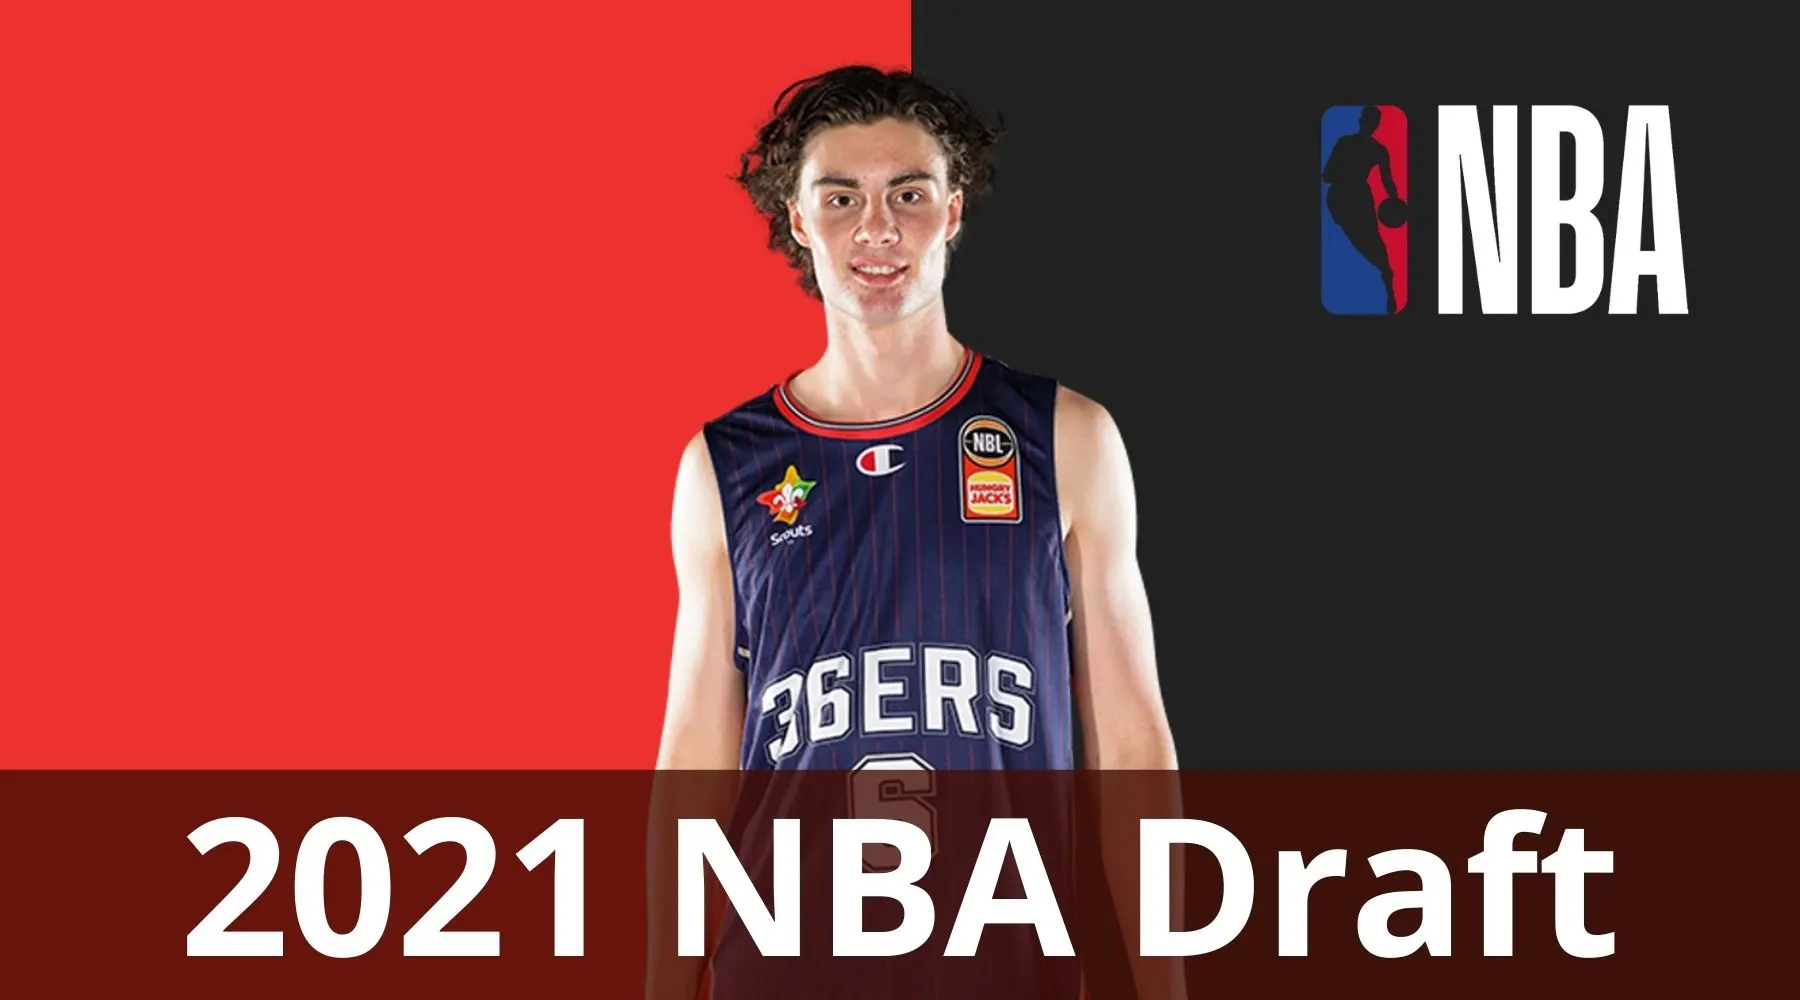 2021 NBA Draft Watch live and free in Australia and start time